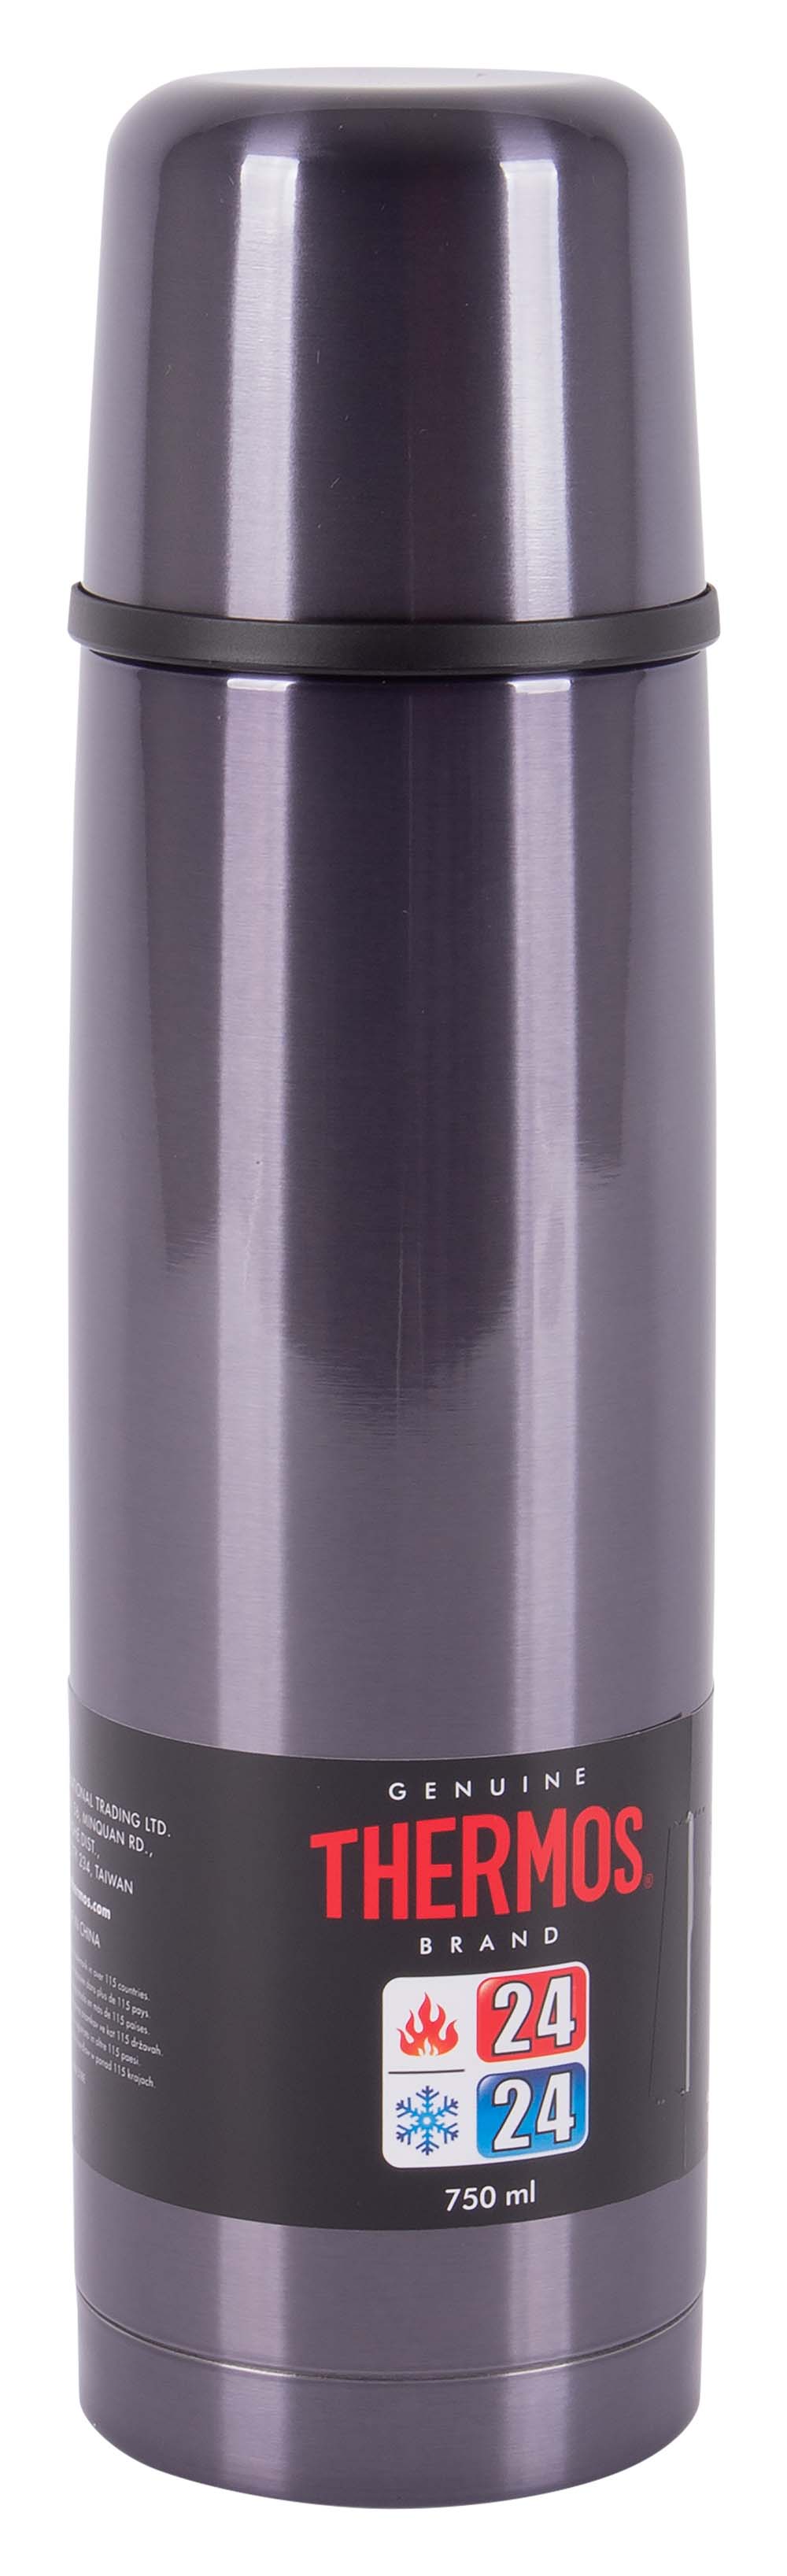 7398062 Thermos - Thermoisolierflasche - Thermax - 750ml